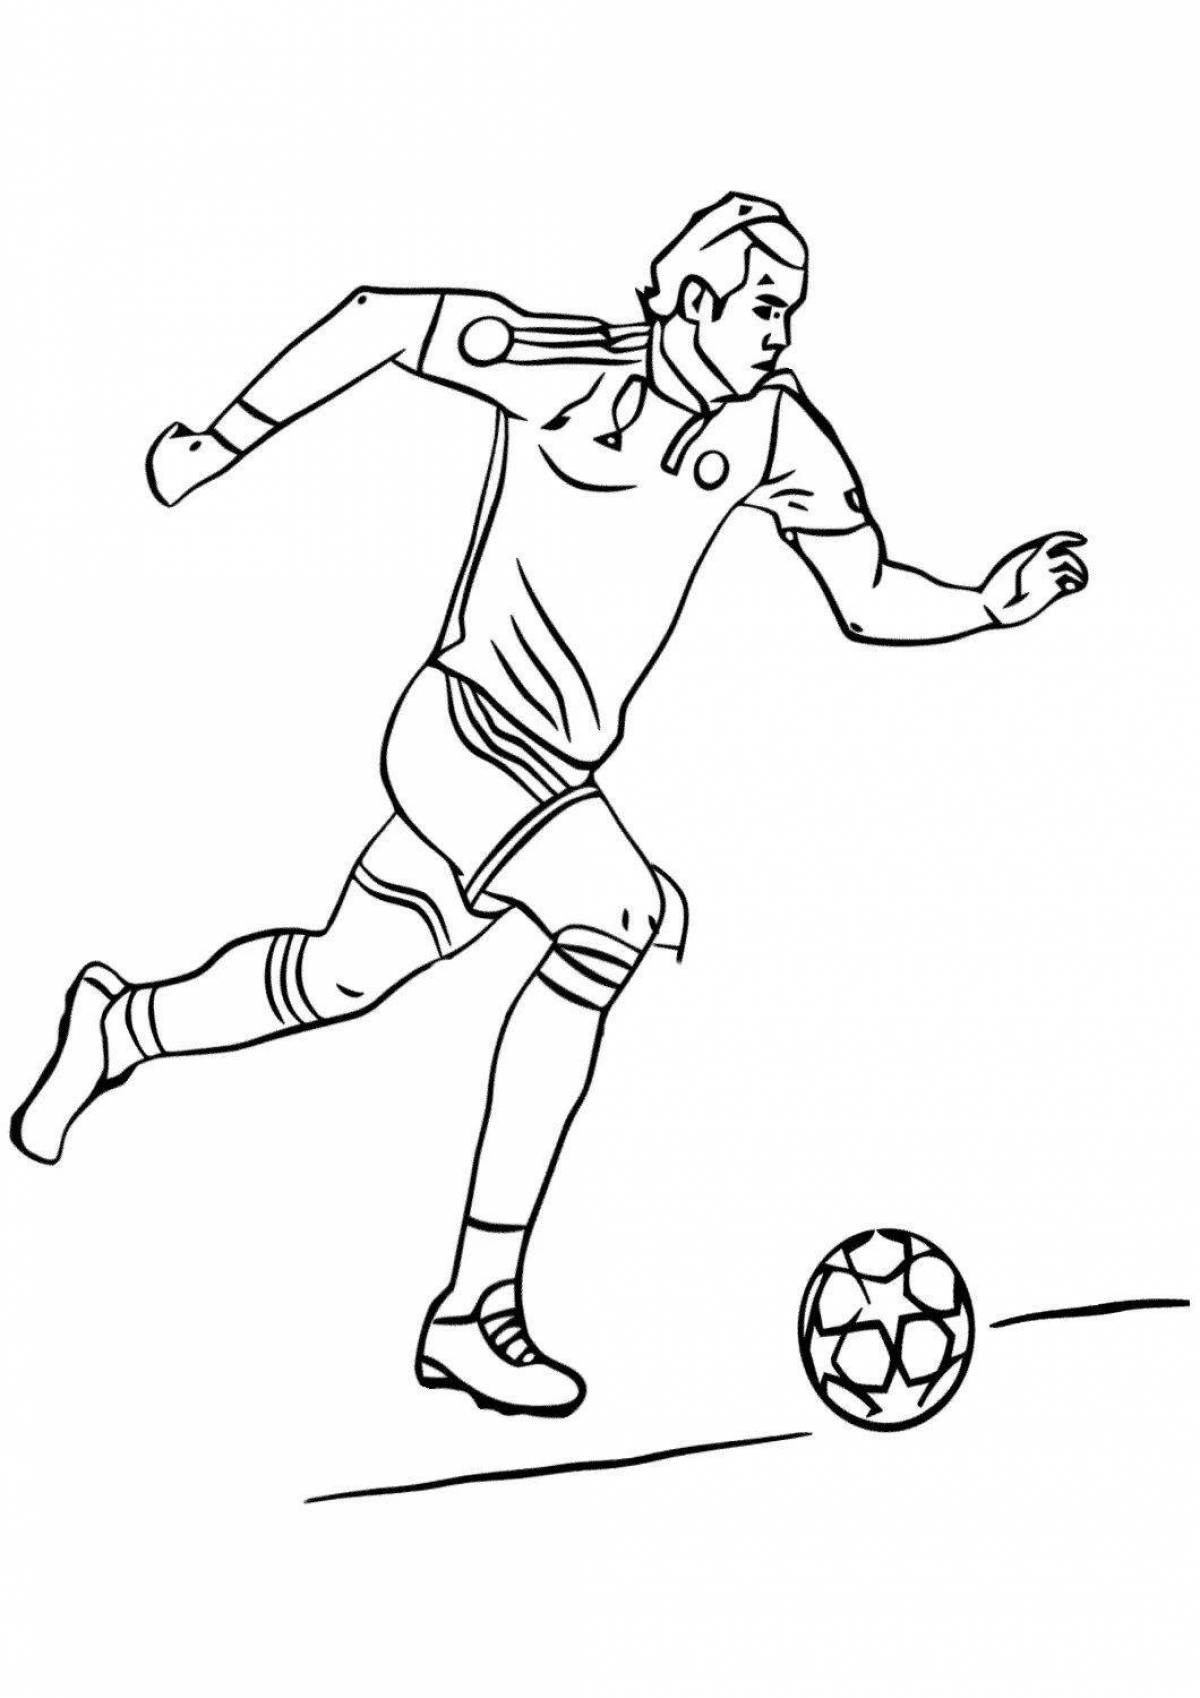 Attractive football messi coloring book